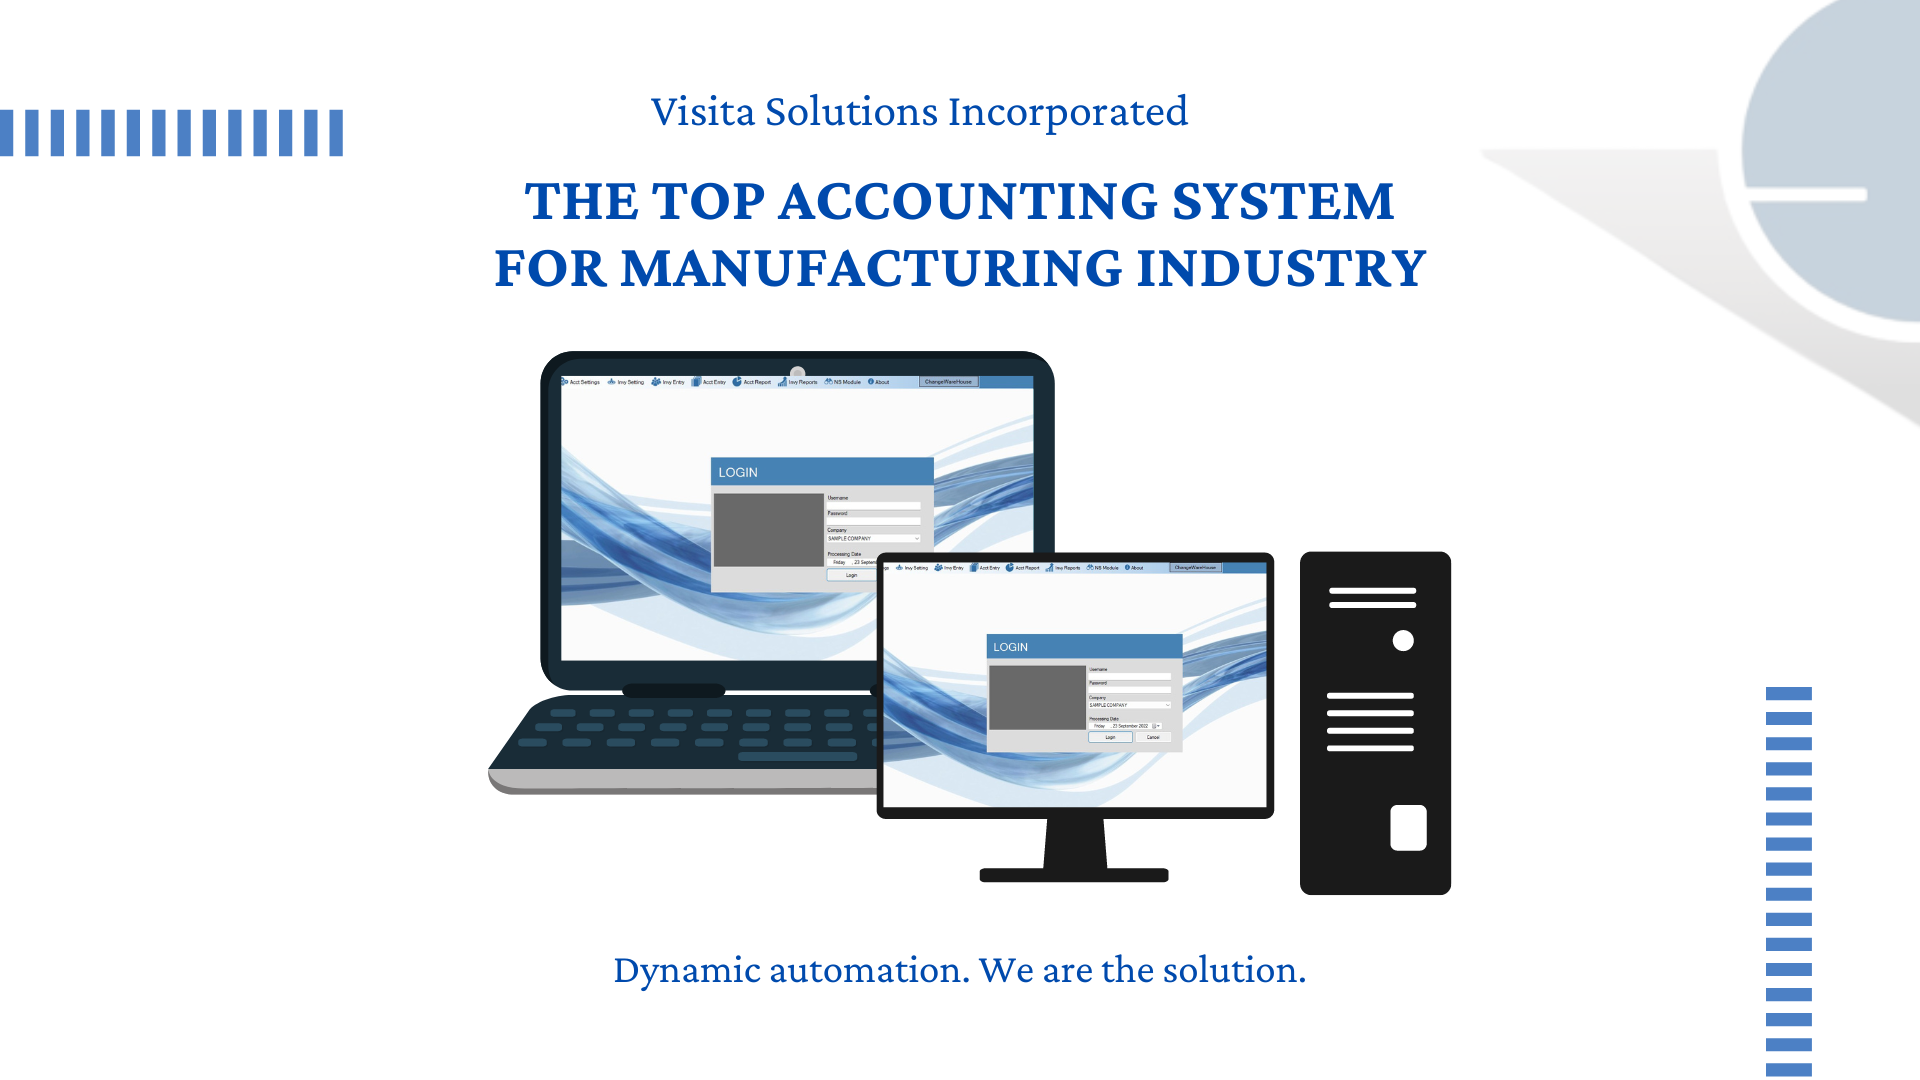 The top accounting system for manufacturing industry